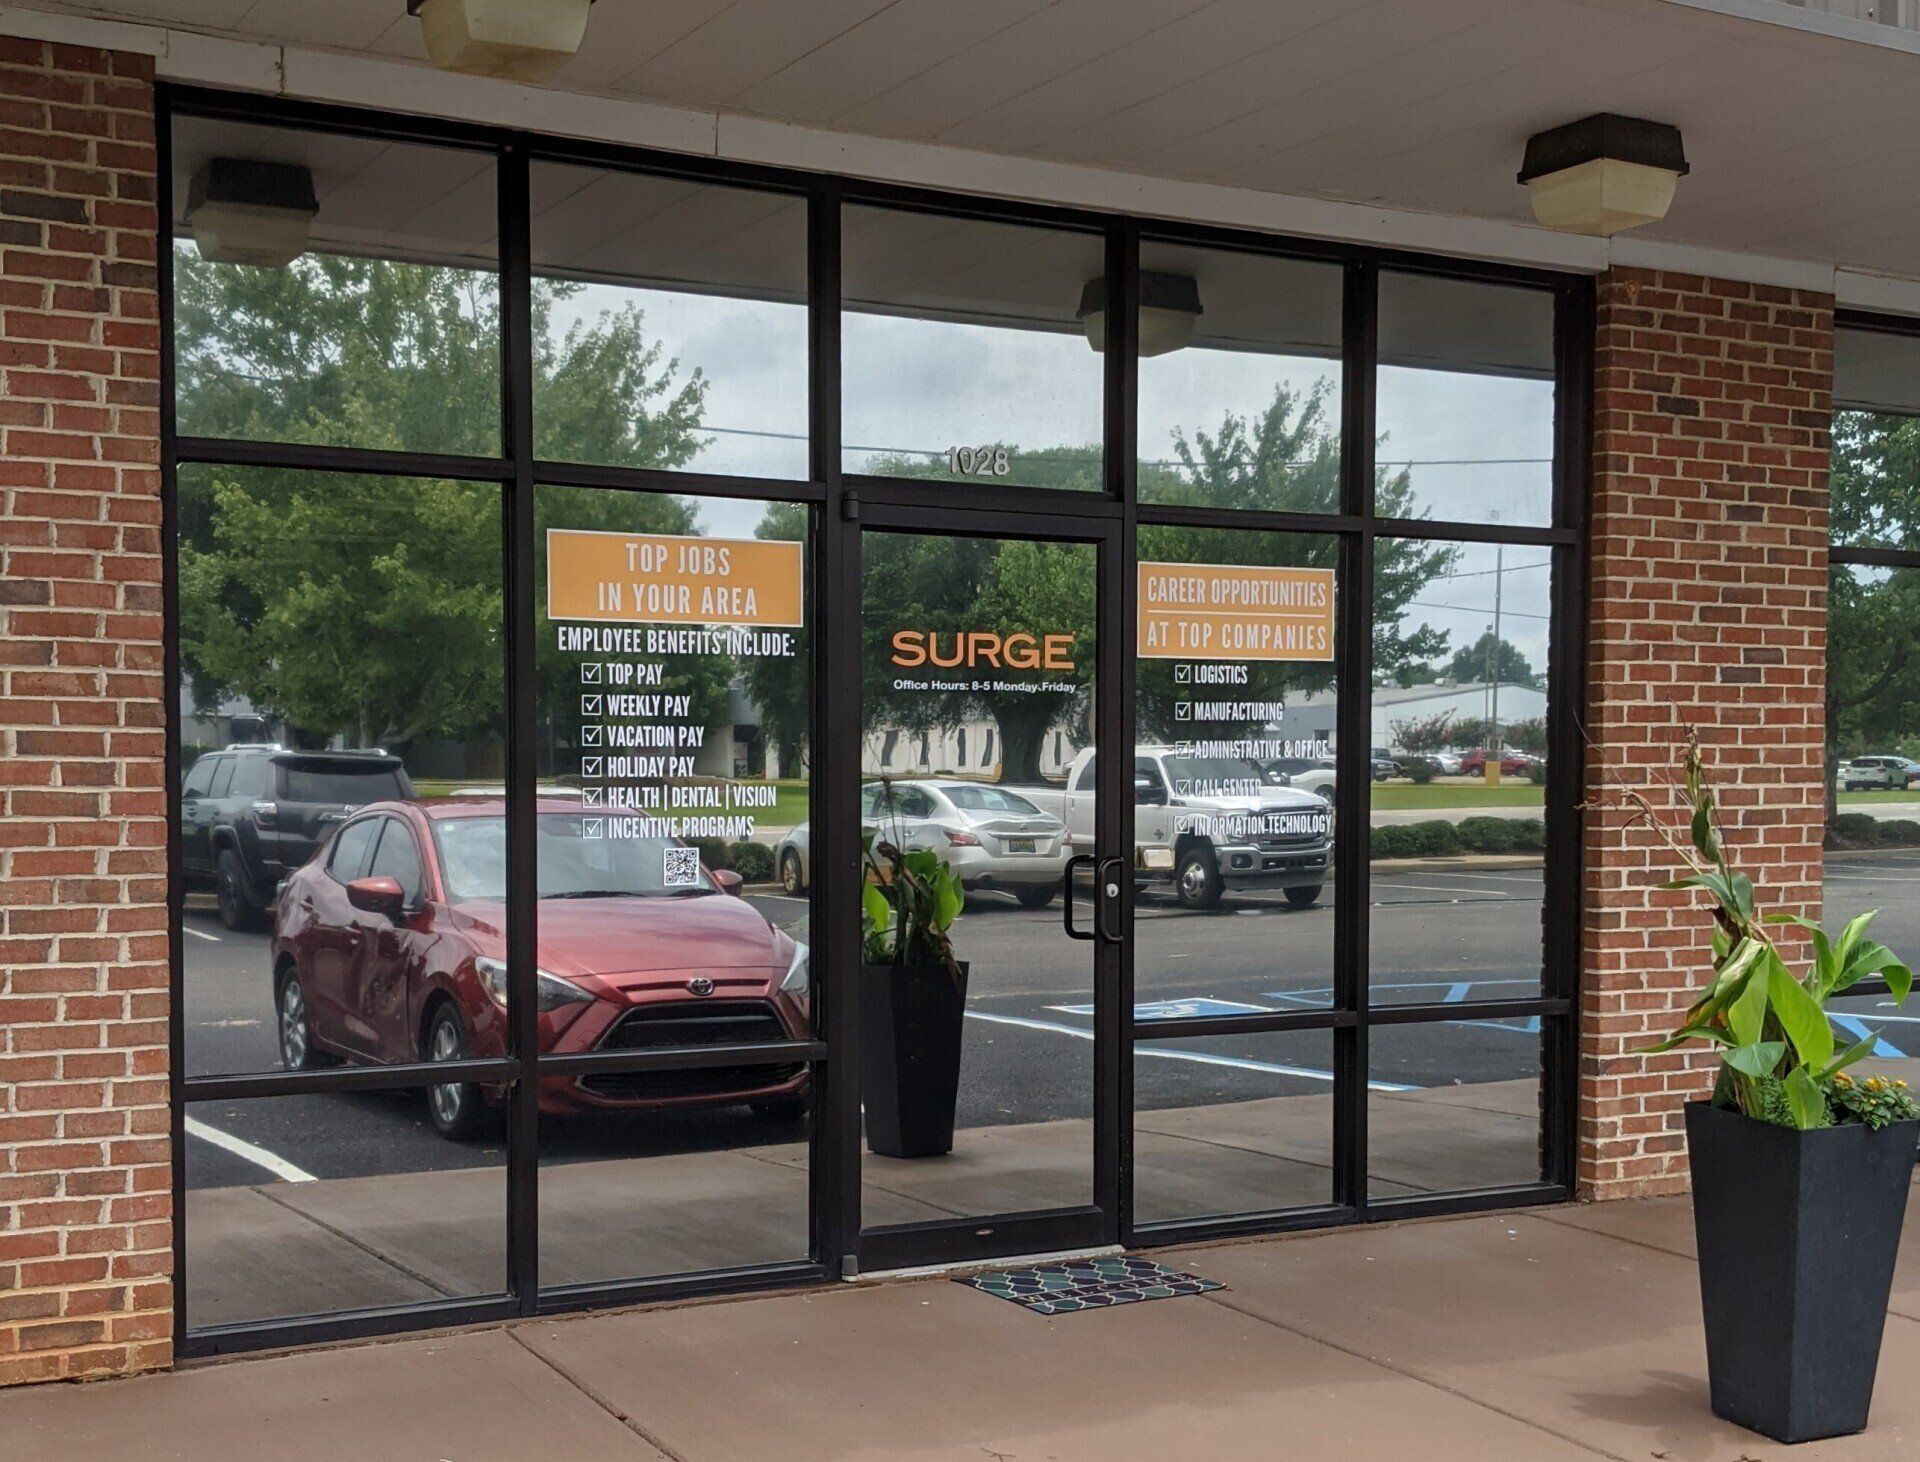 Office Window tint treatment in Prattville AL - SPF Performance storefront tint blocked heat adding real energy efficiency at Surge Staffing in Prattville, AL